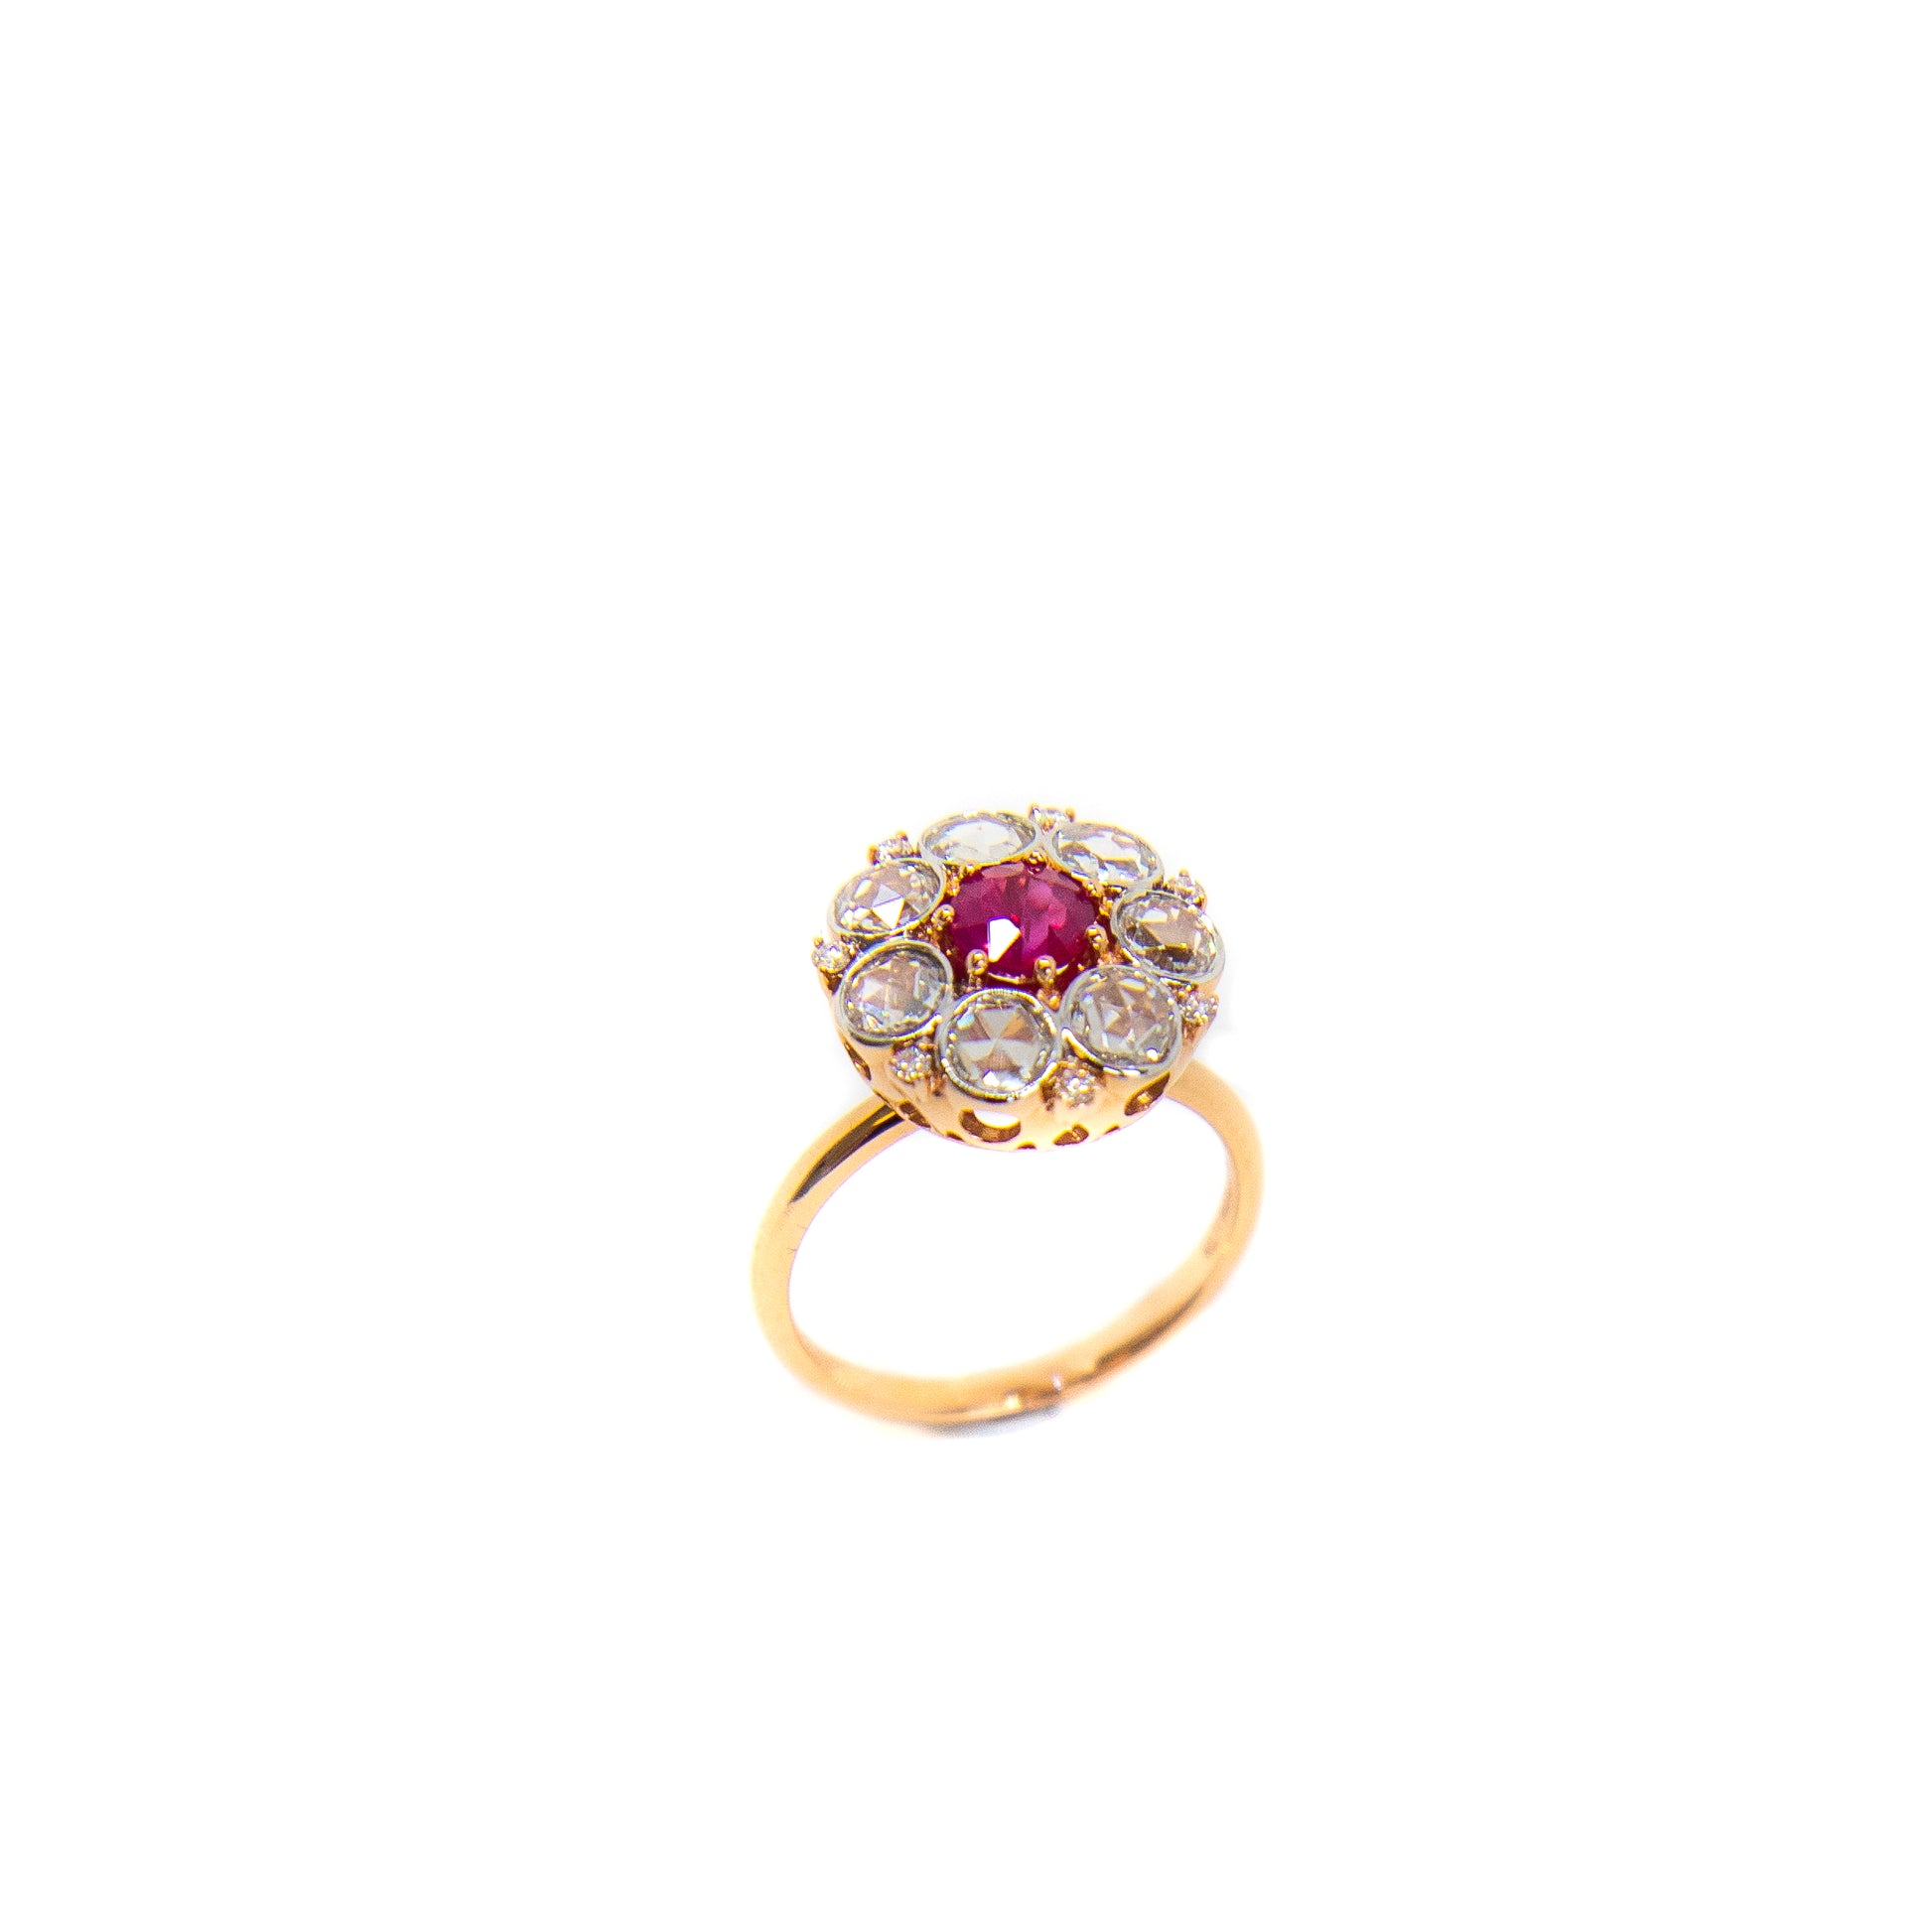 Ruby and rose cut diamond cluster ring in Rose Gold